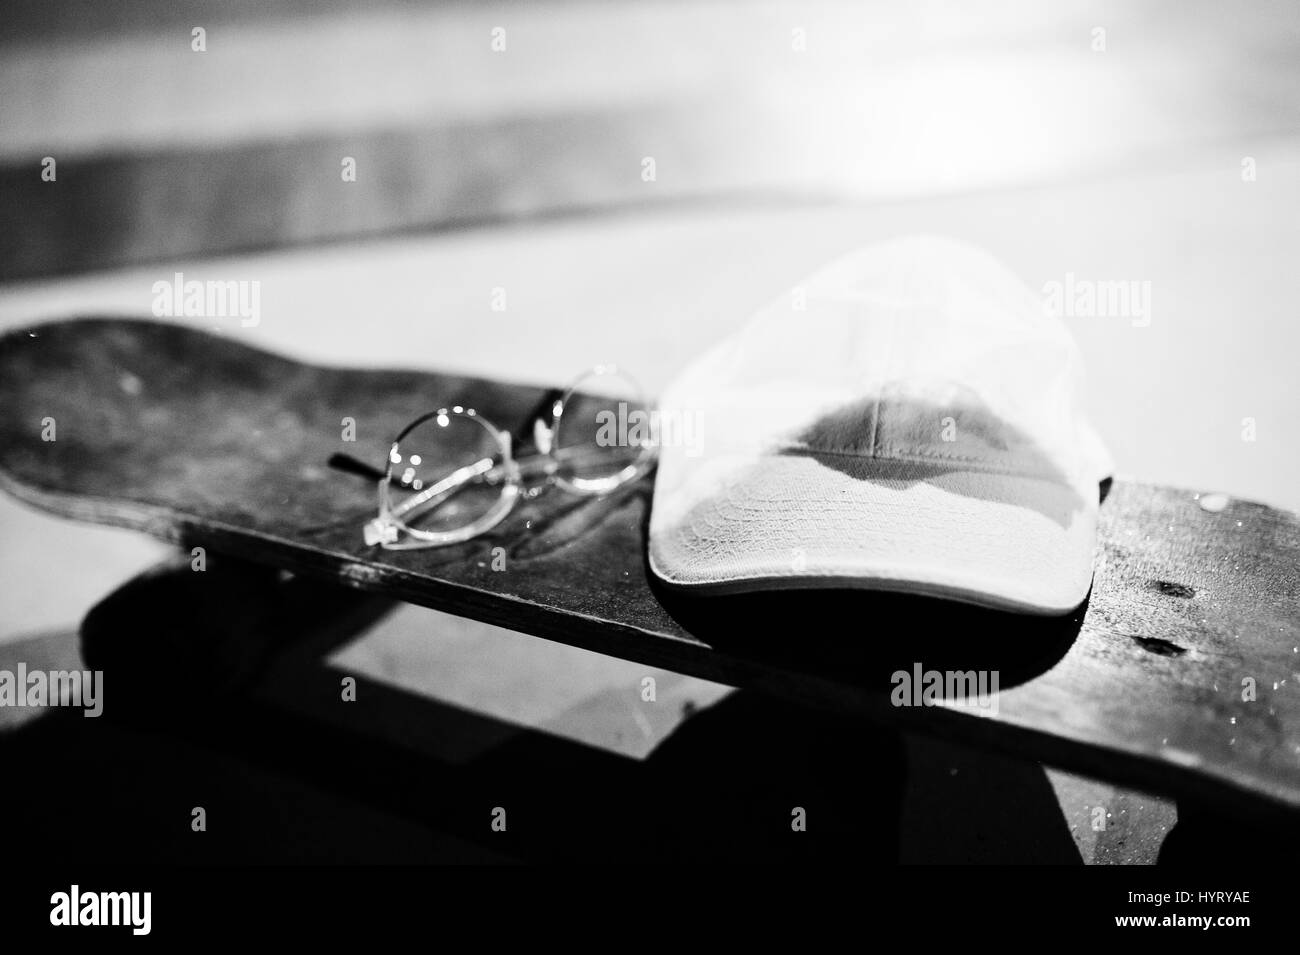 Skateboard wallpaper Black and White Stock Photos & Images - Alamy